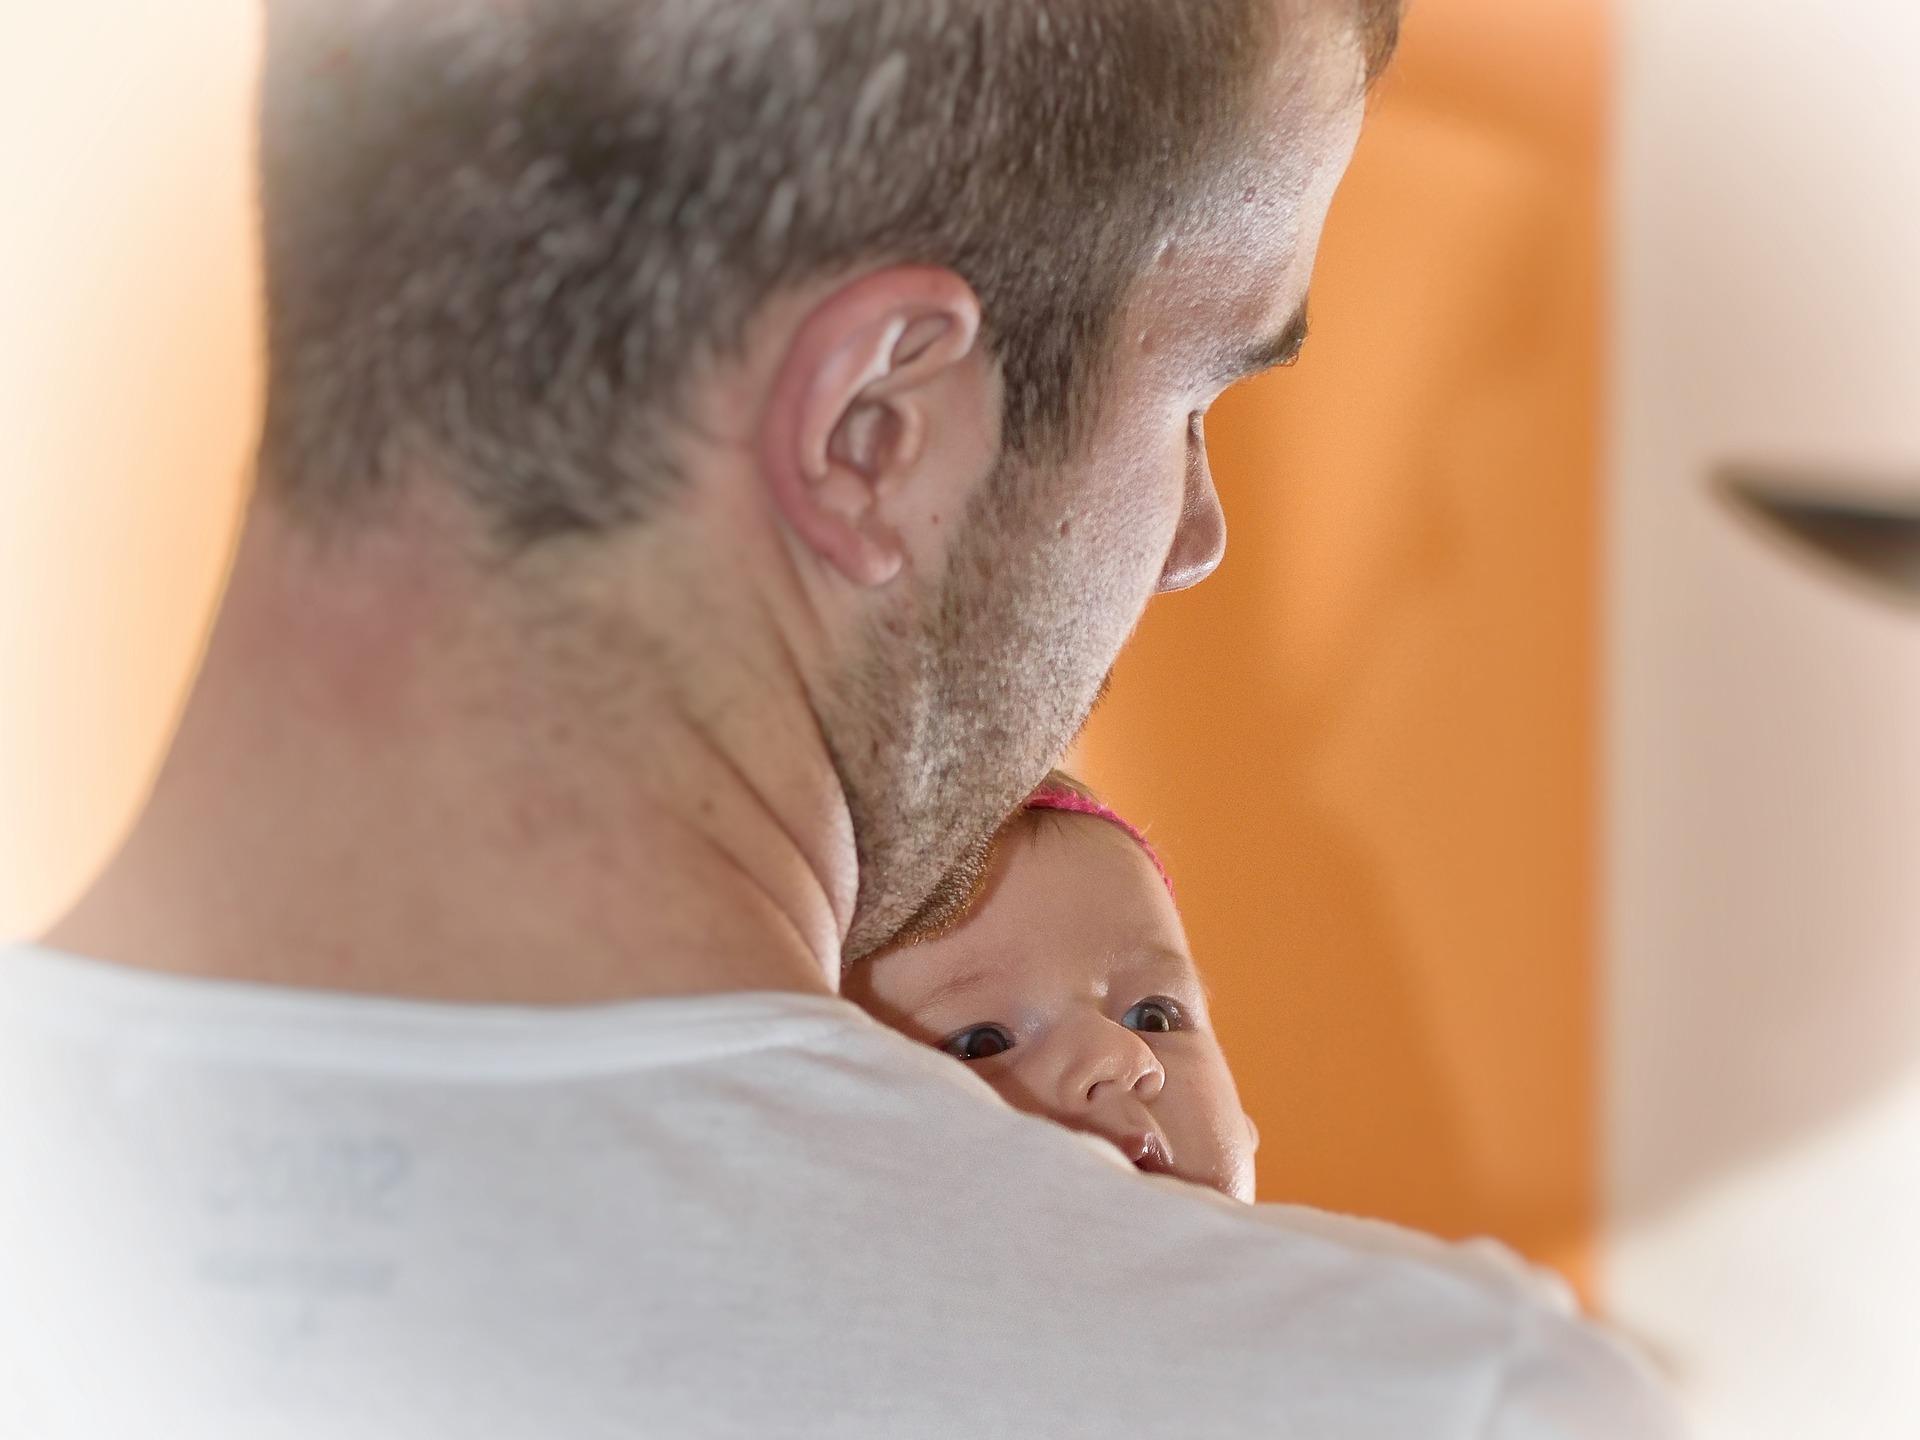 The dad guide to newborns: How a dad can understand and soothe his crying baby